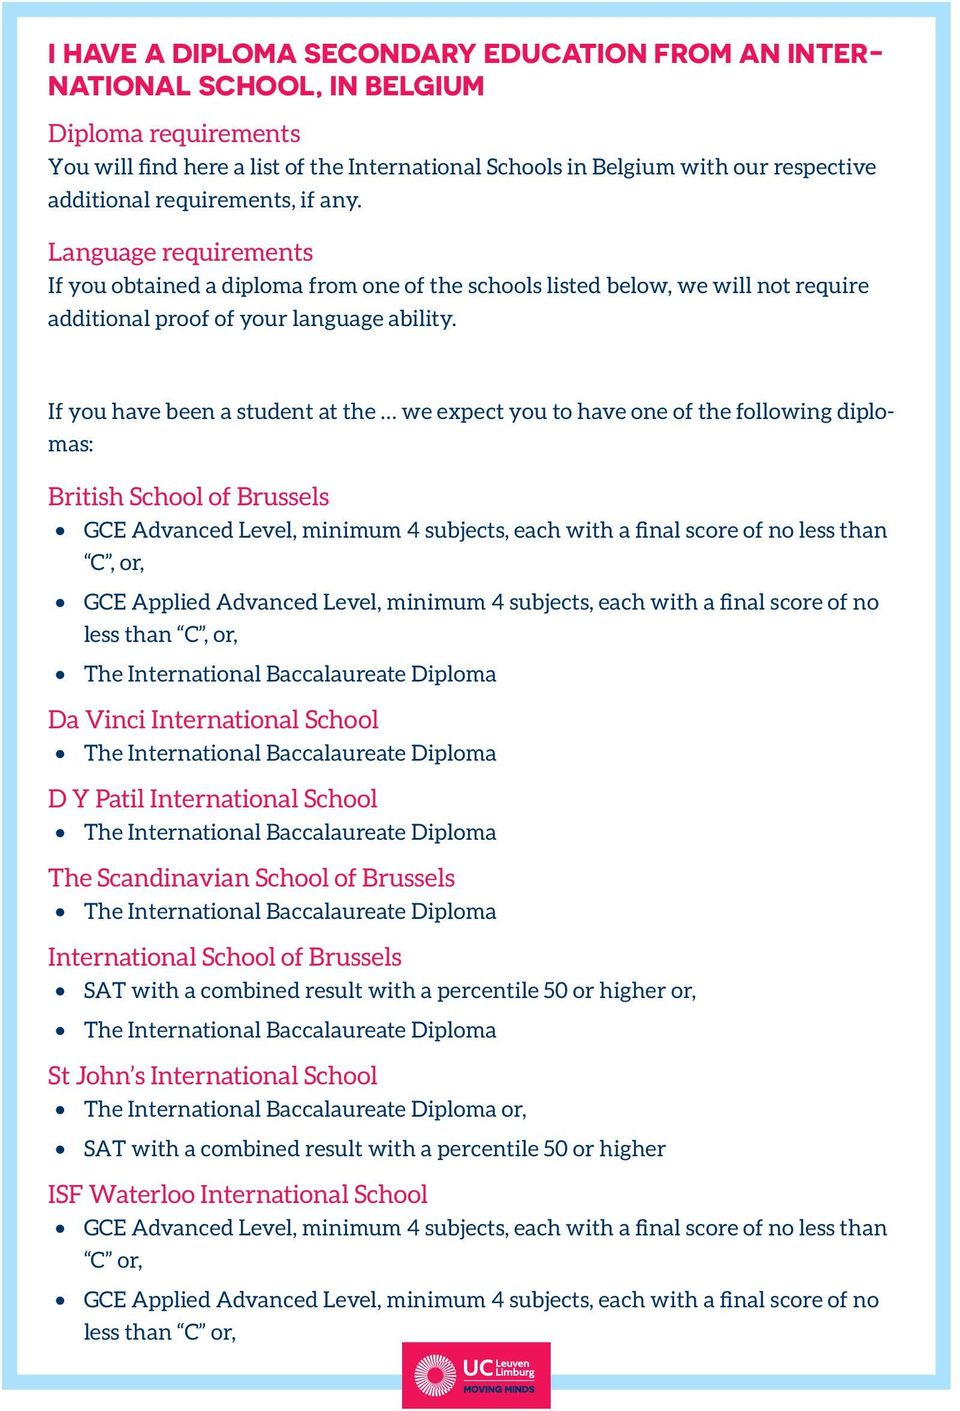 If you have been a student at the we expect you to have one of the following diplomas: British School of Brussels GCE Advanced Level, minimum 4 subjects, each with a final score of no less than C,